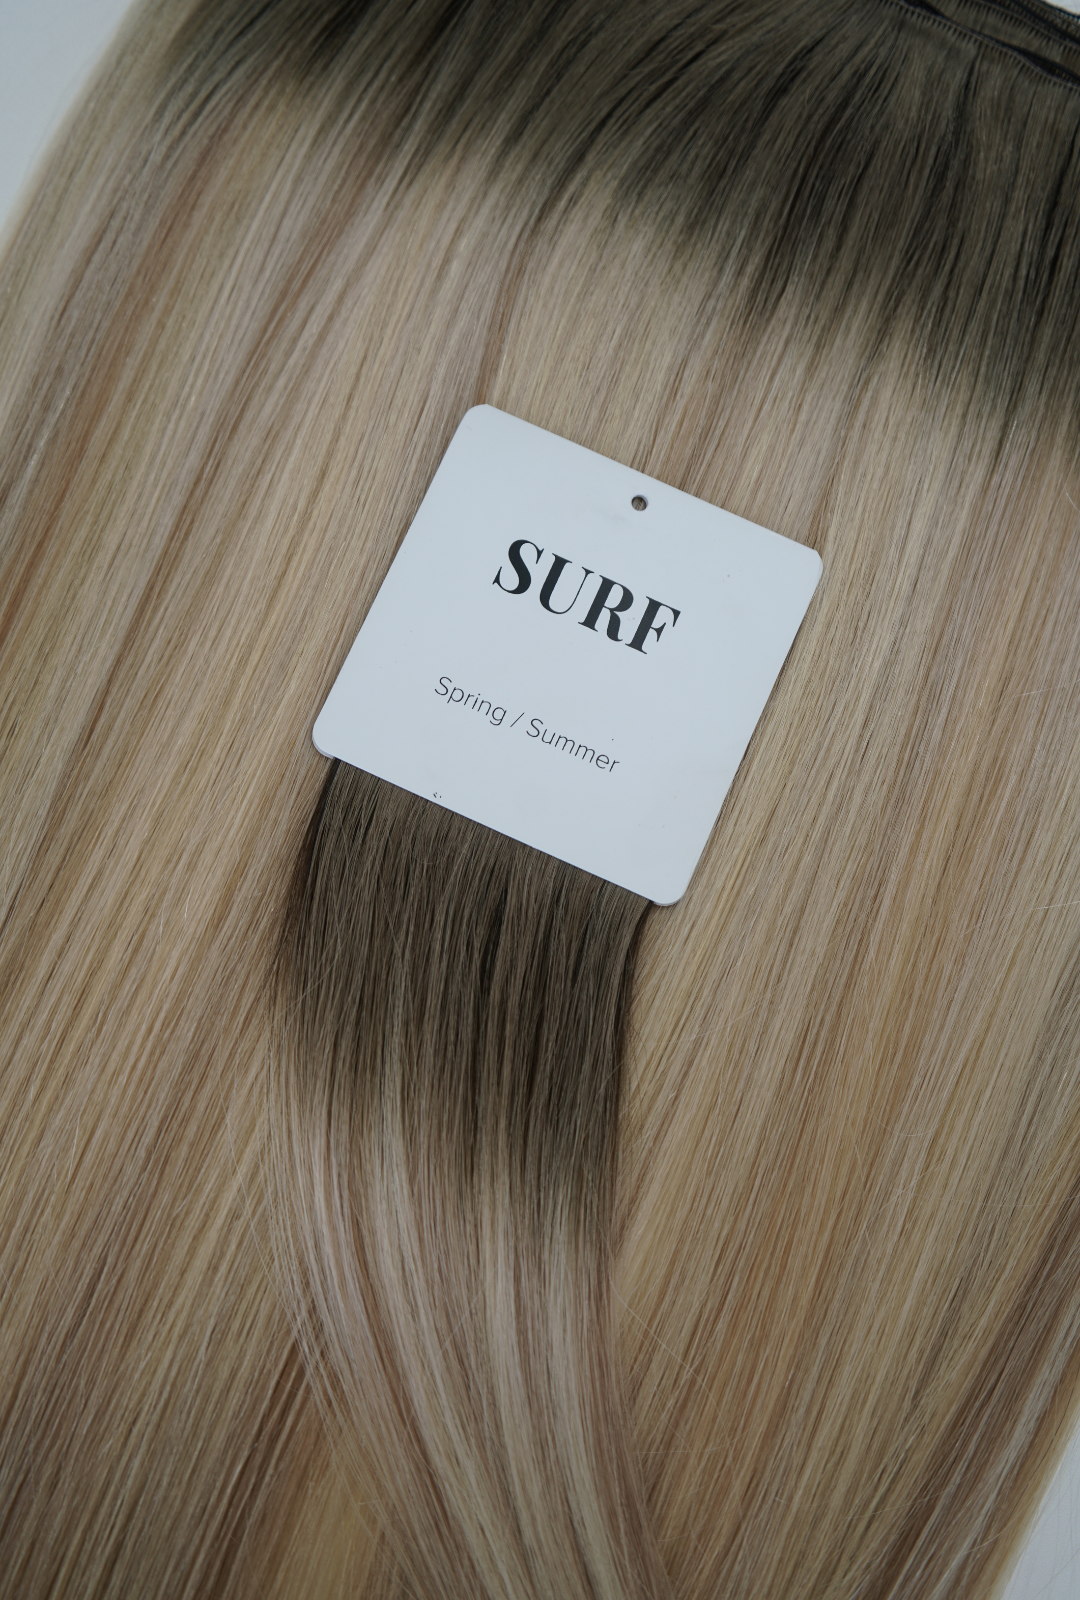 Beachwashed X Laced Hair Hand Tied Weft Extensions - Surf